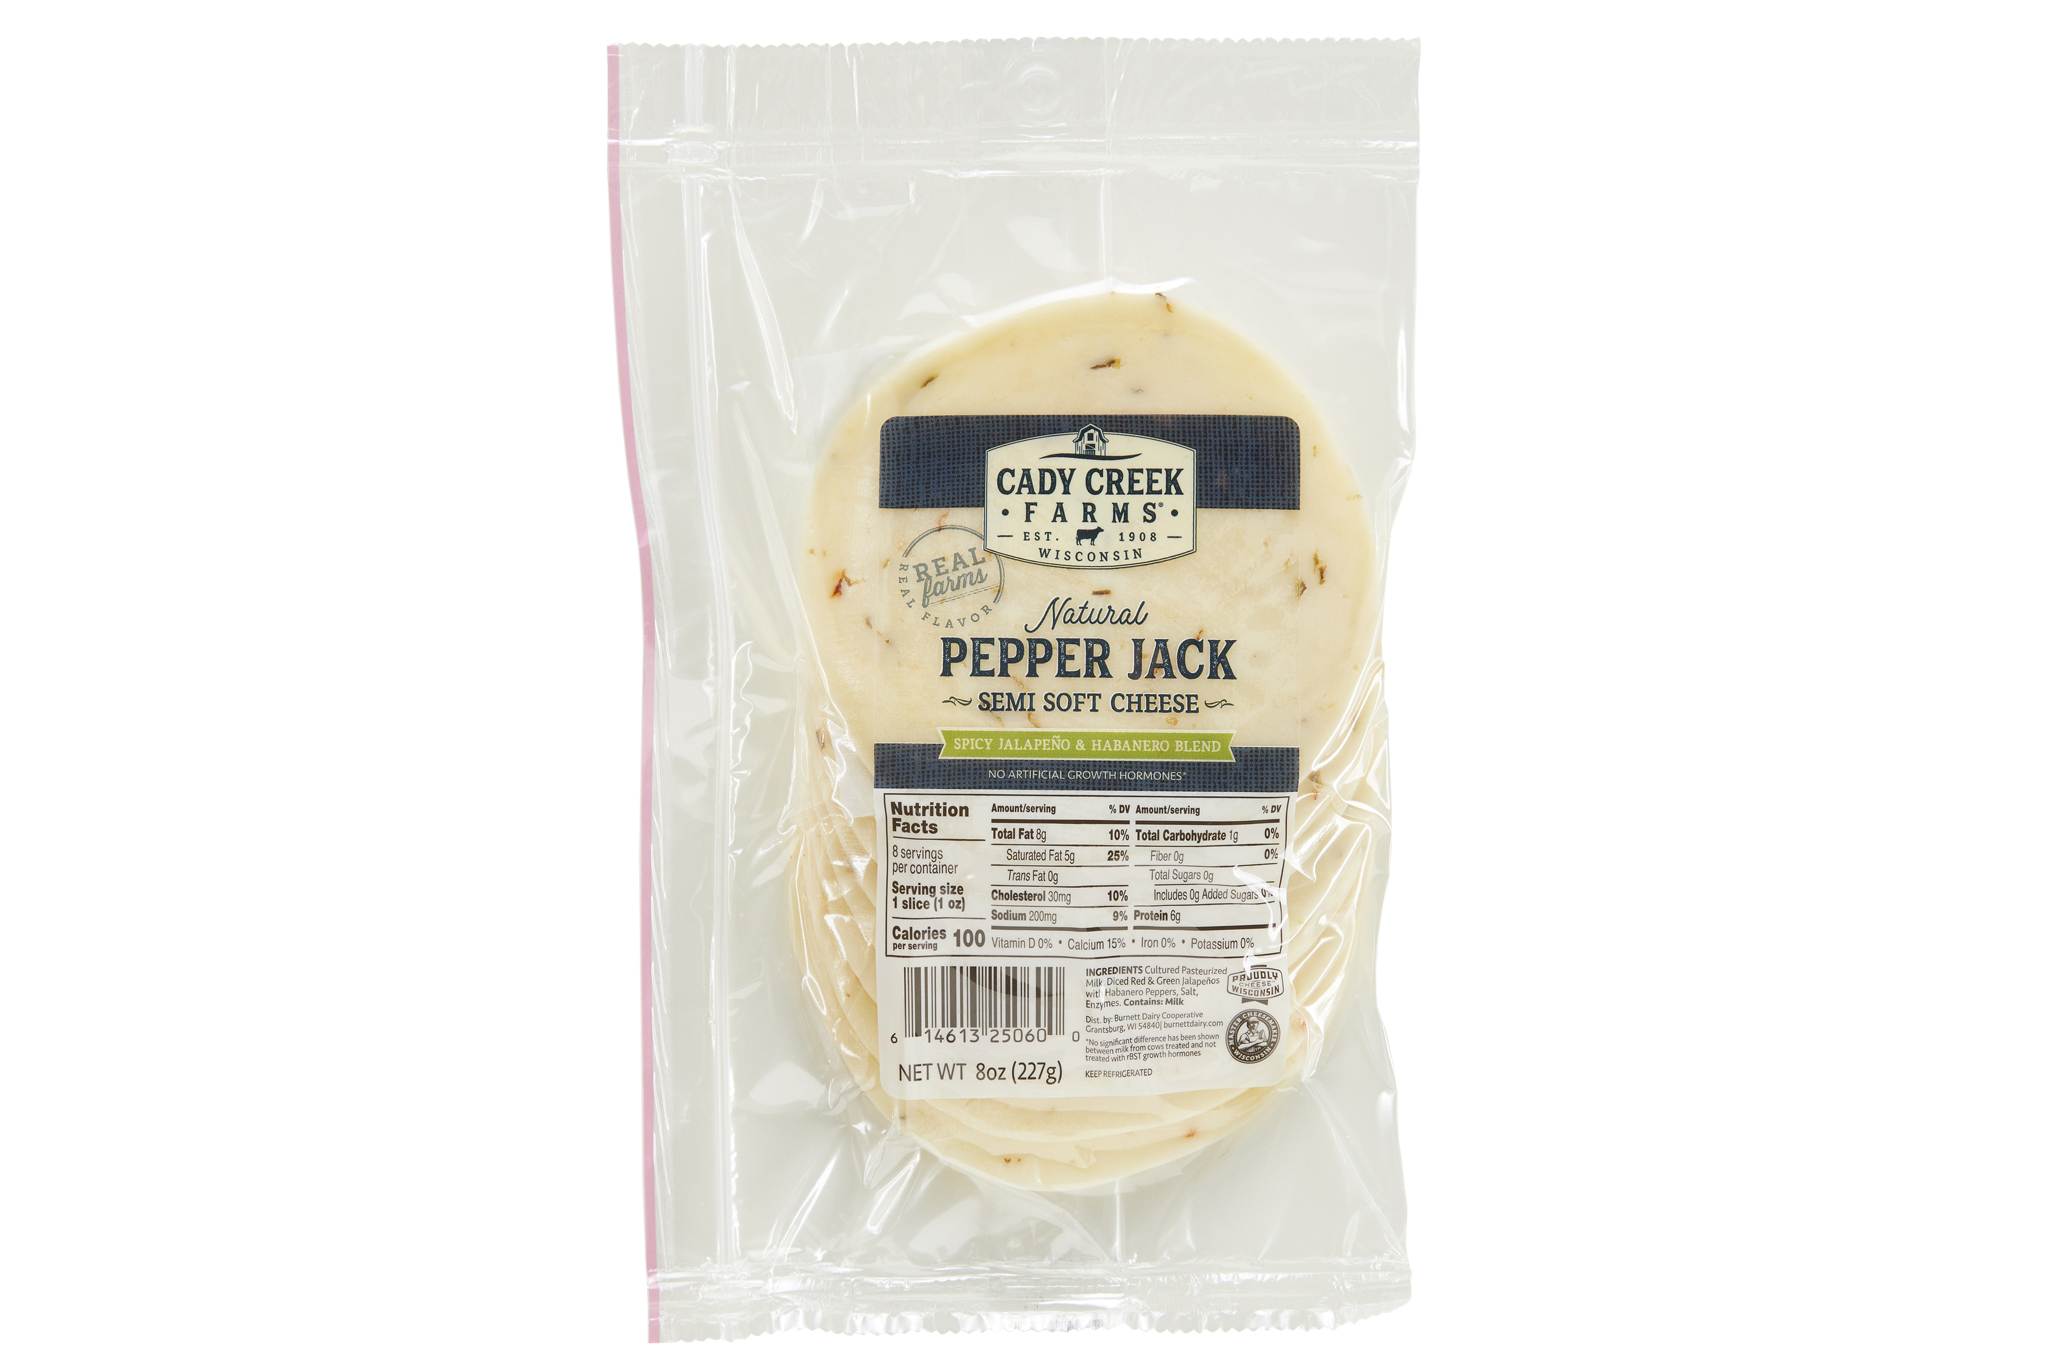 Cady Creek Farms Hot Pepper 8 oz. slices in package